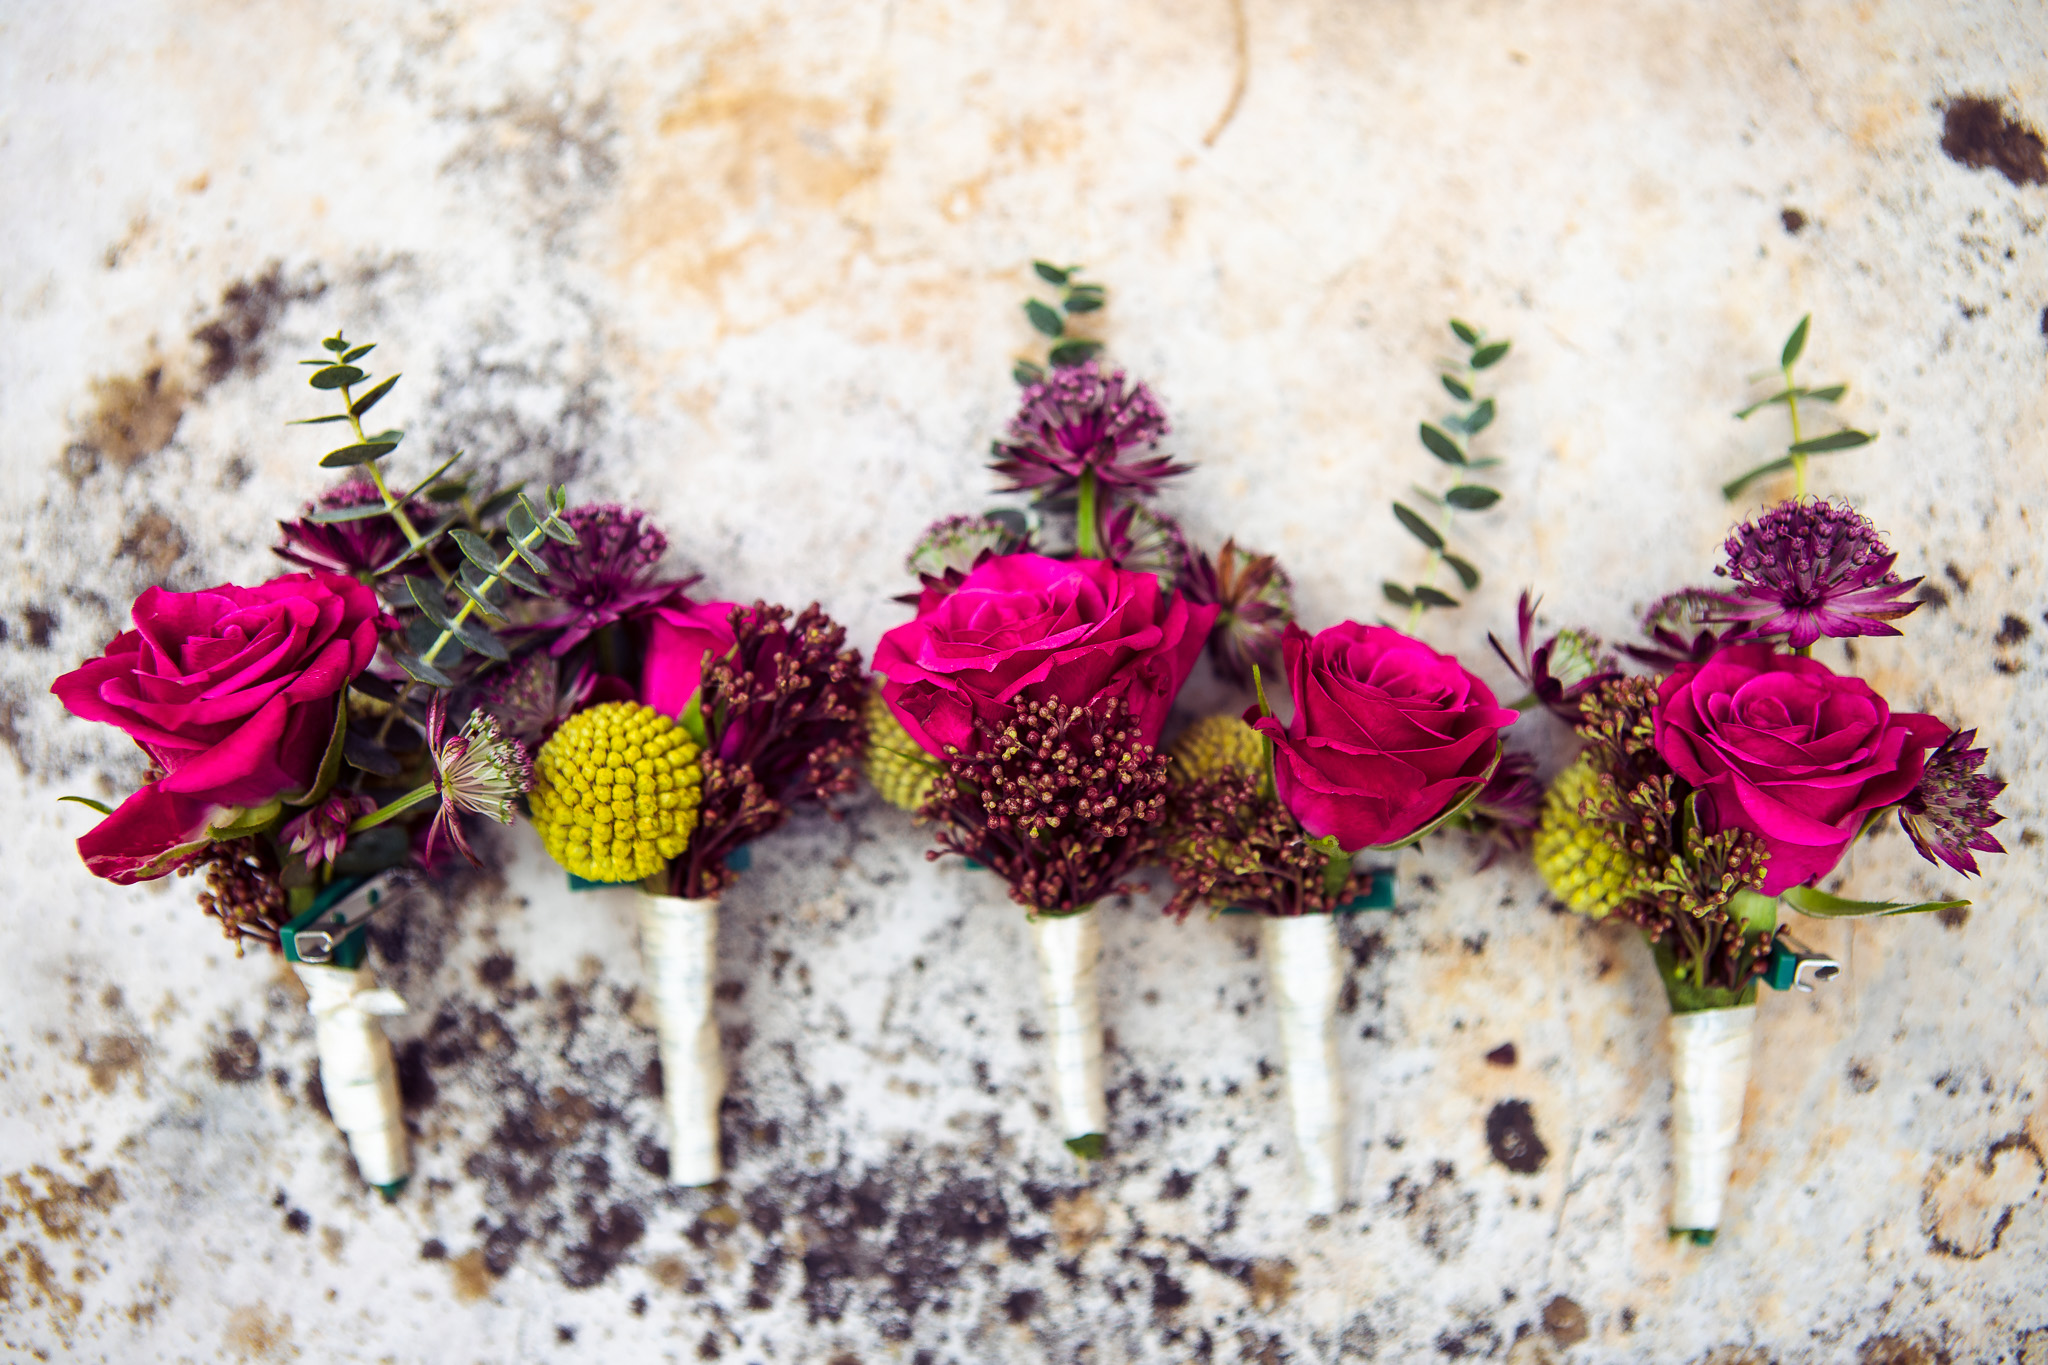 Pink rose buttonholes lying down on a stone surface.